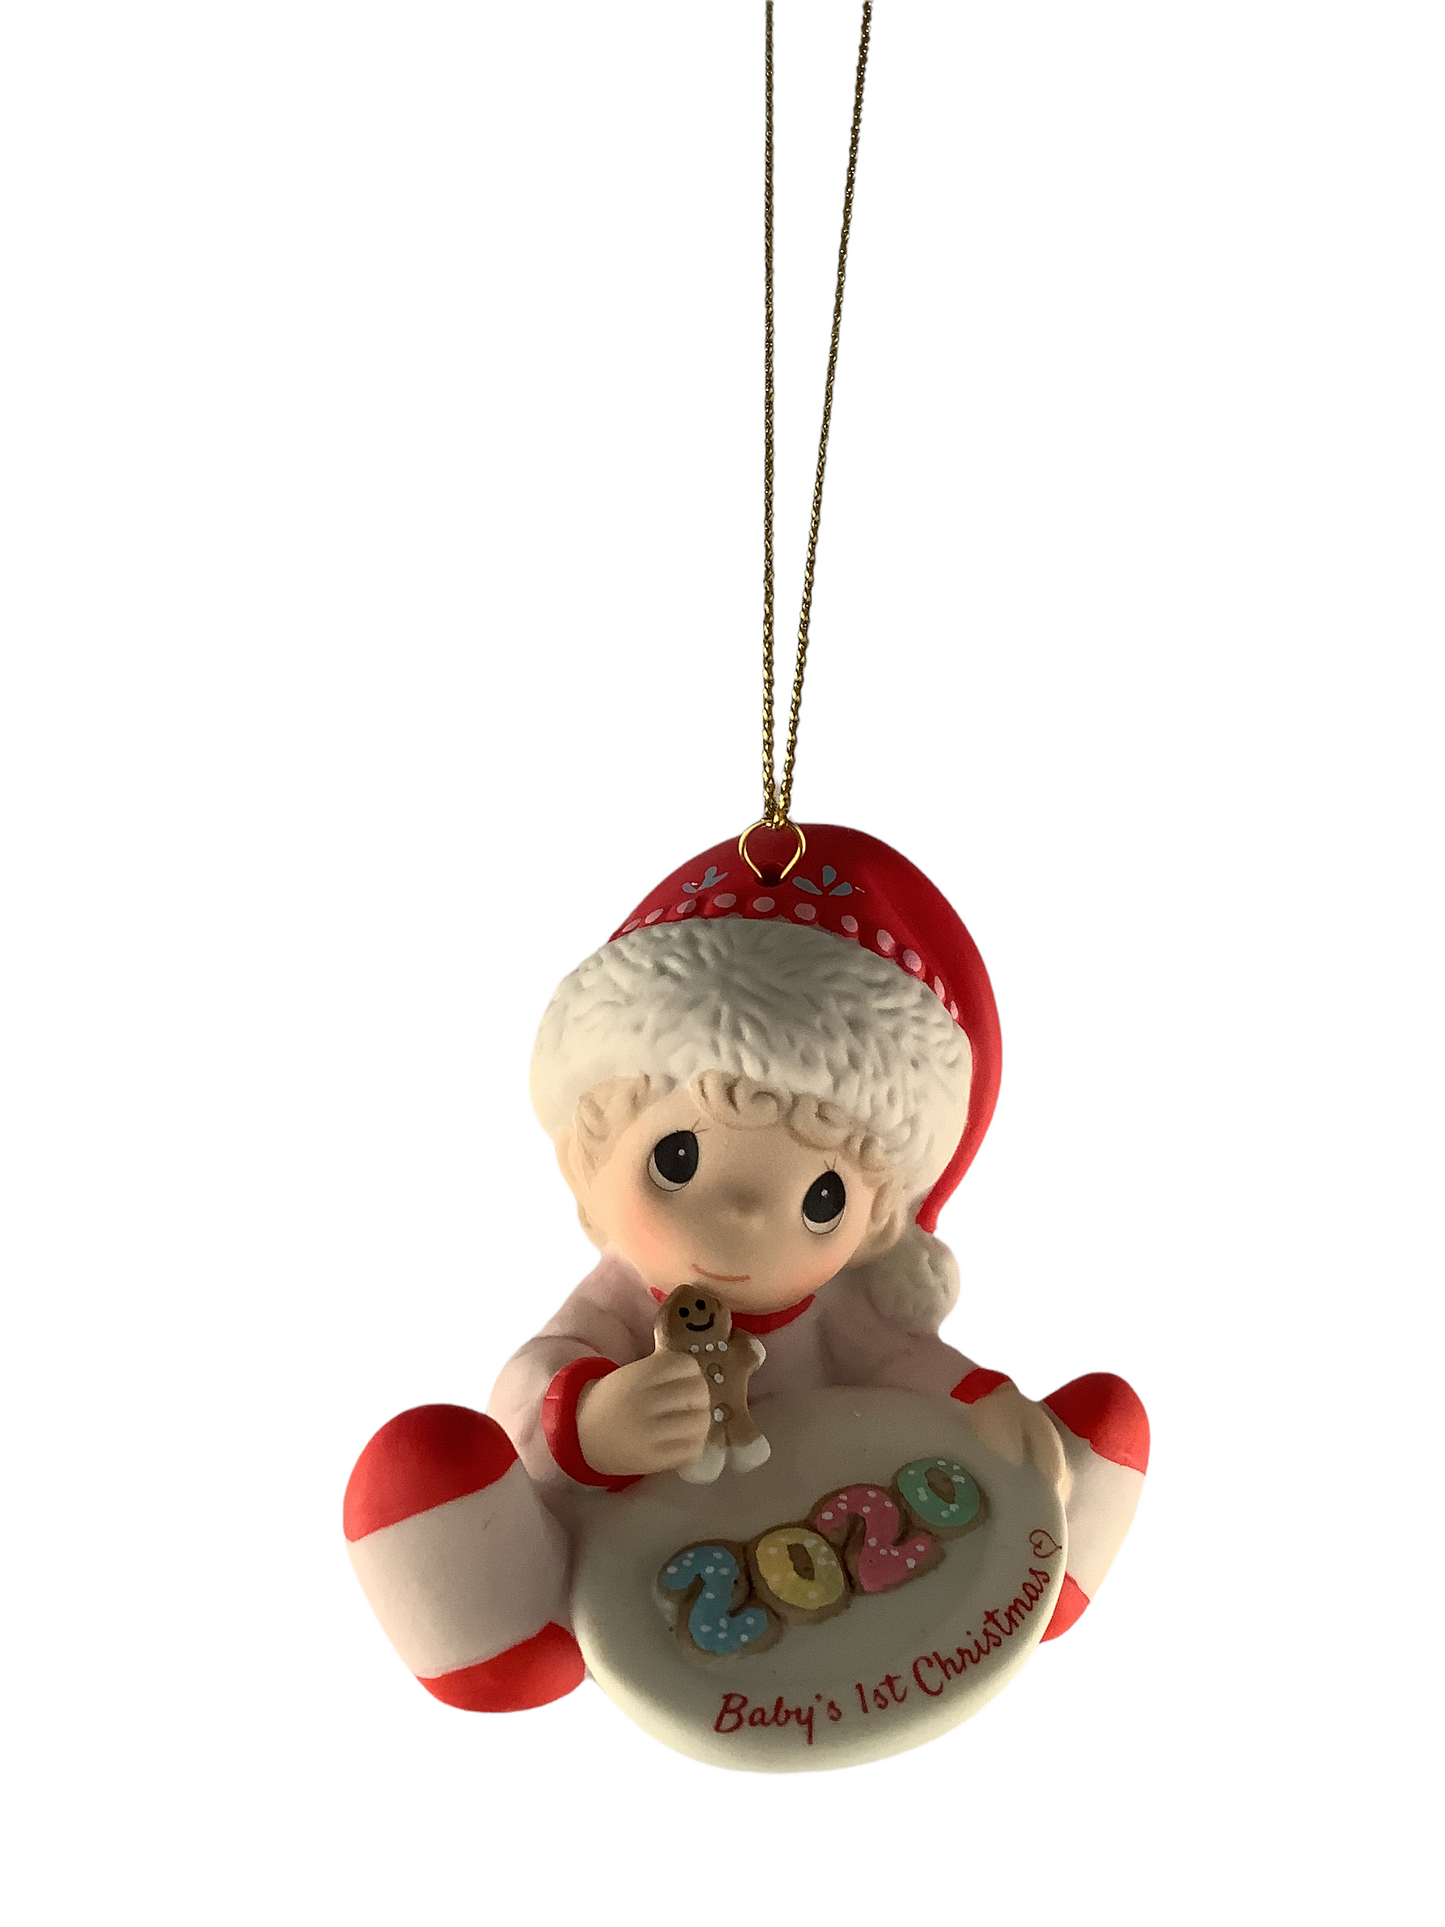 Baby's First Christmas 2020 (Girl) -  Precious Moment Ornament